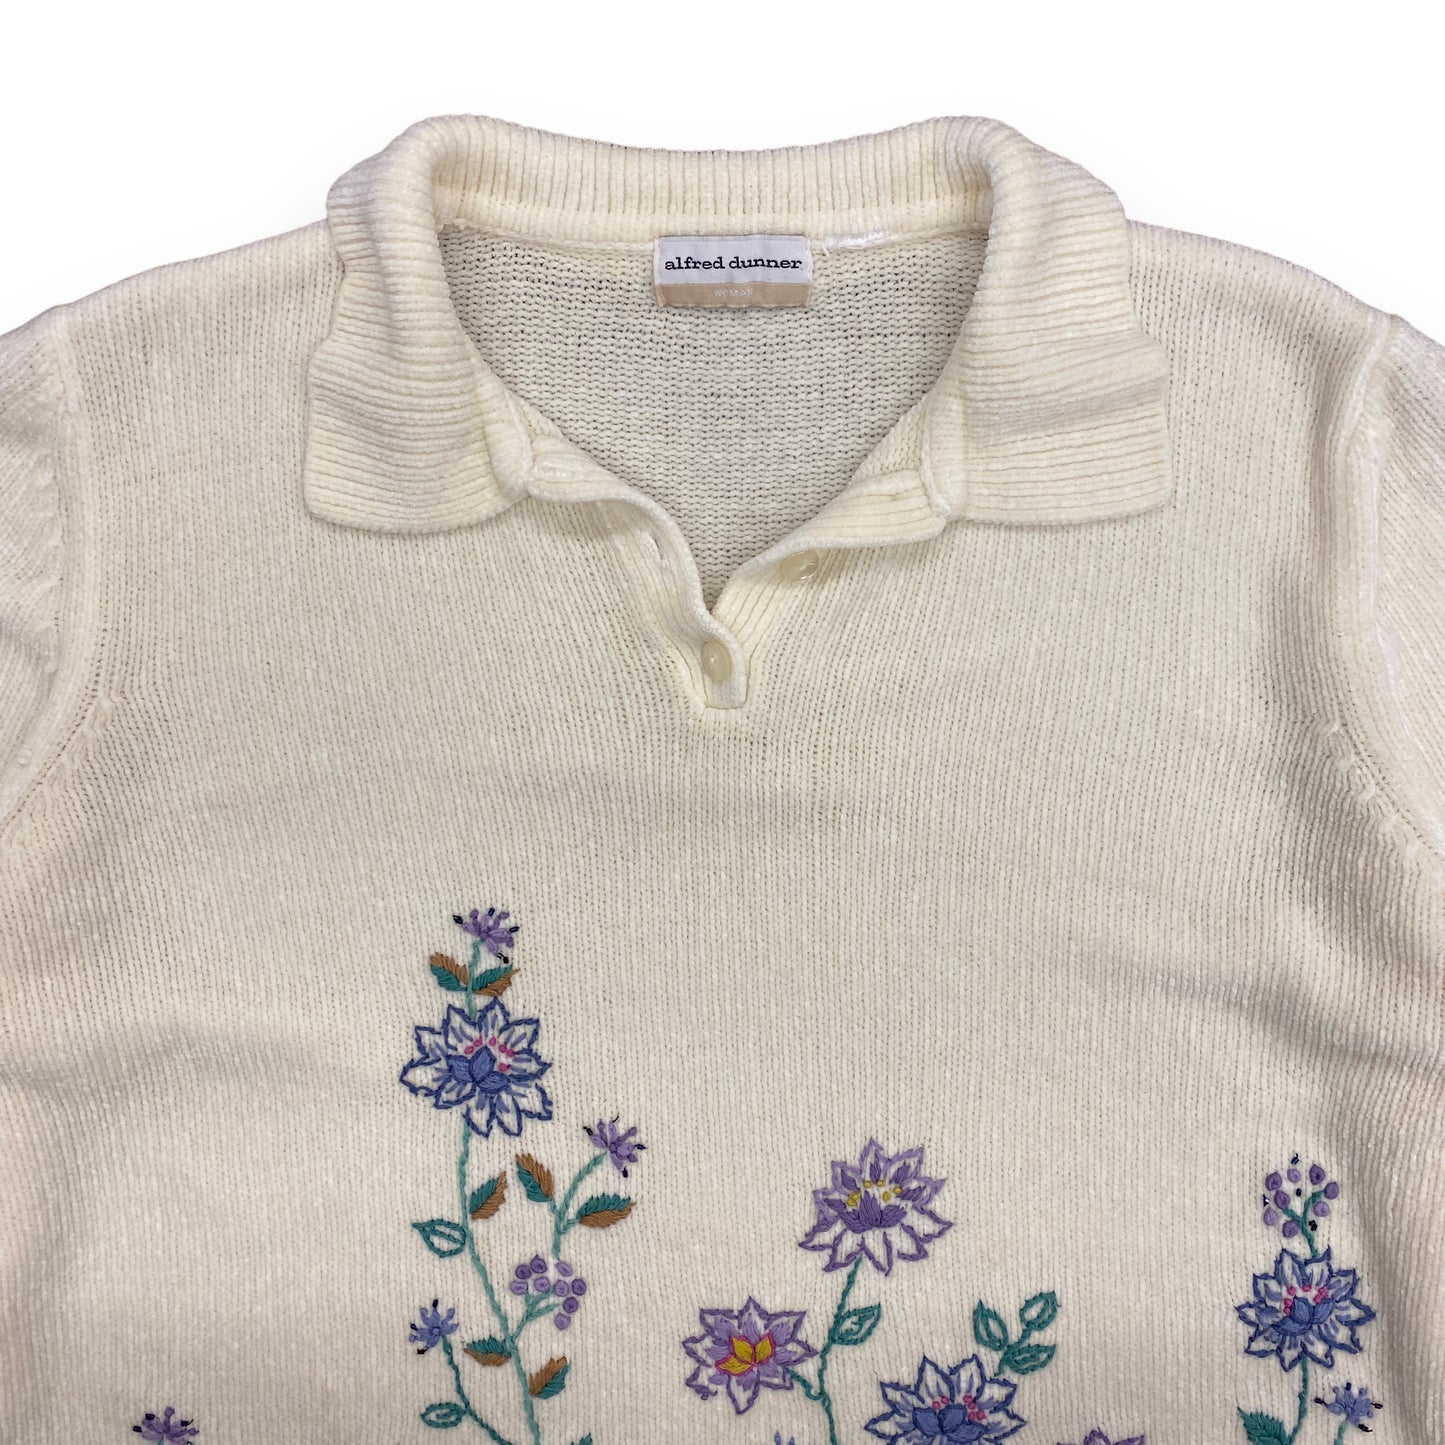 1990s Floral Collared Sweater - Size Large